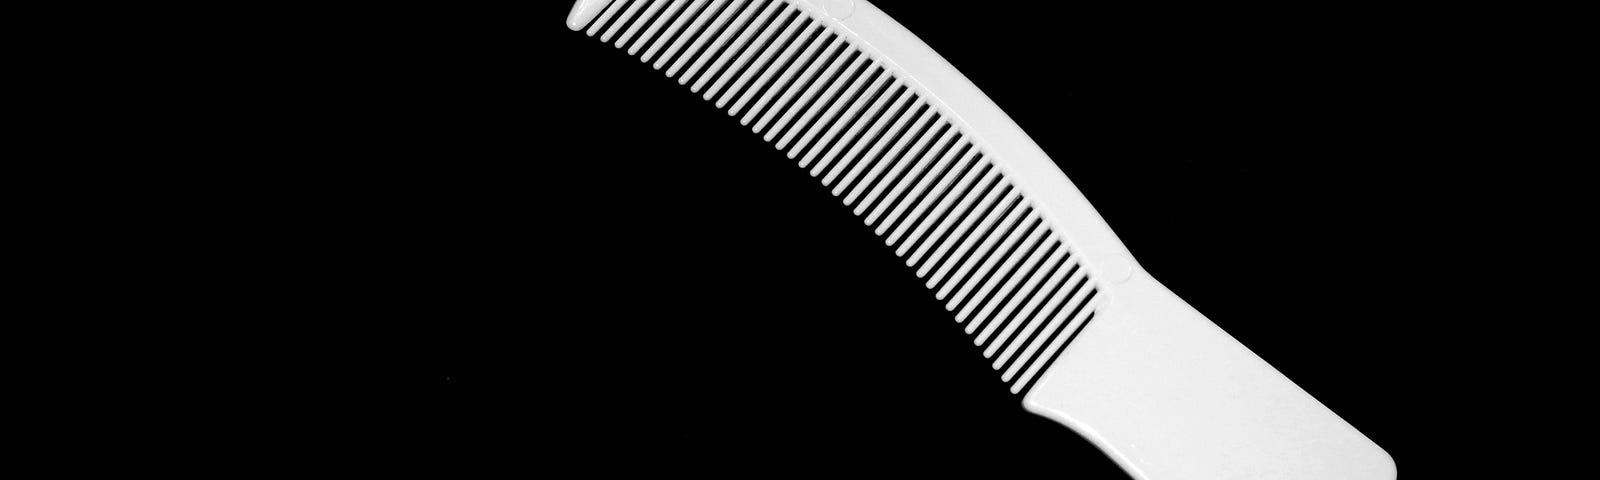 white comb with a black background